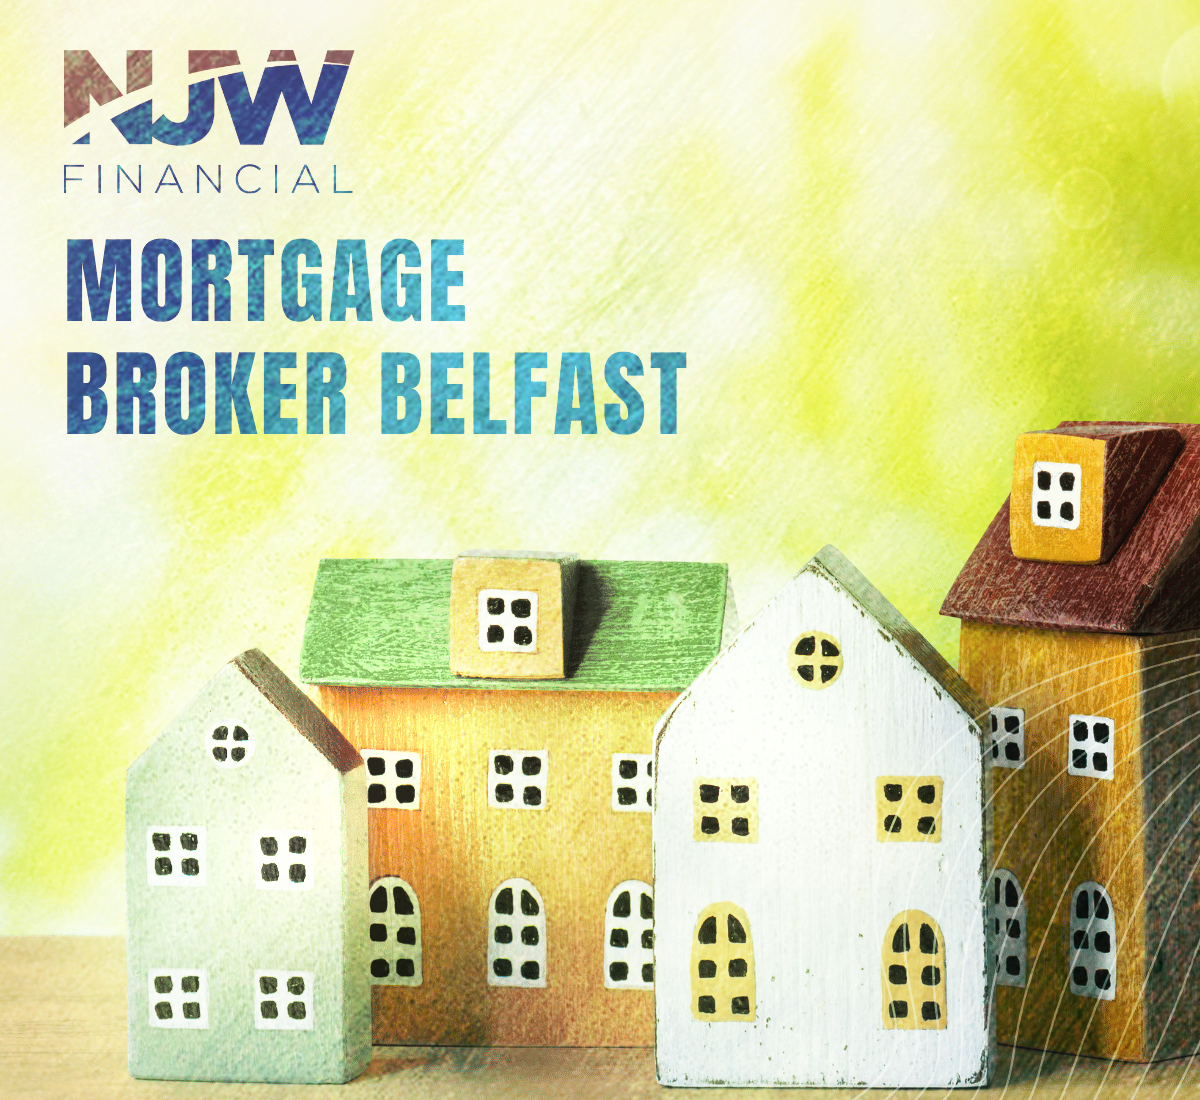 mortgage process, mortgage deals, offering mortgage advice